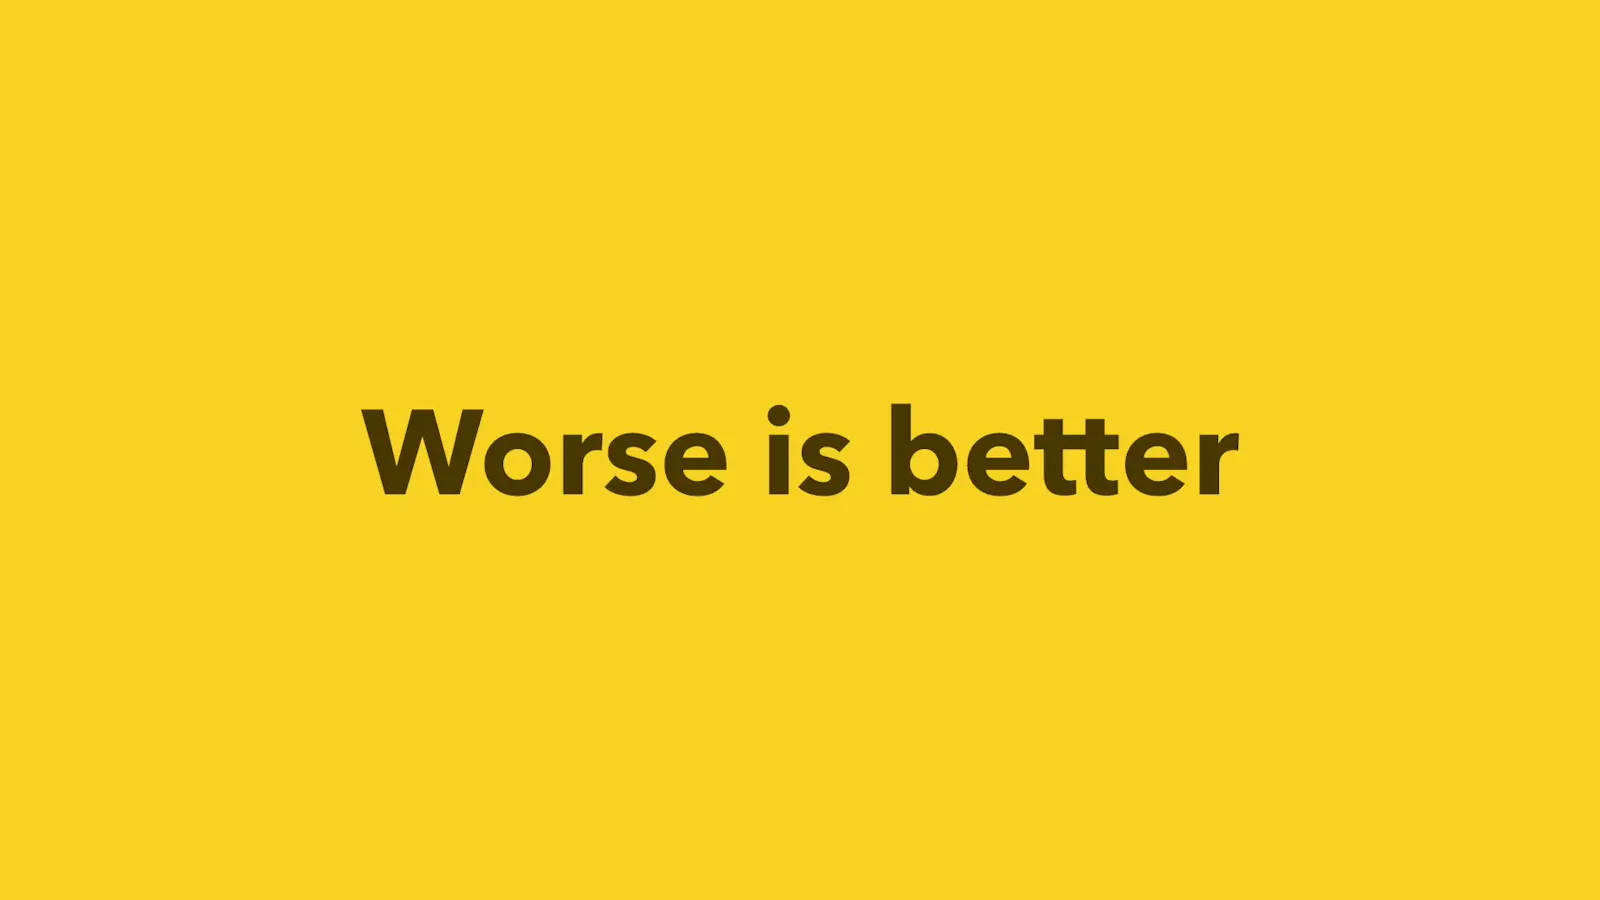 Worse is better